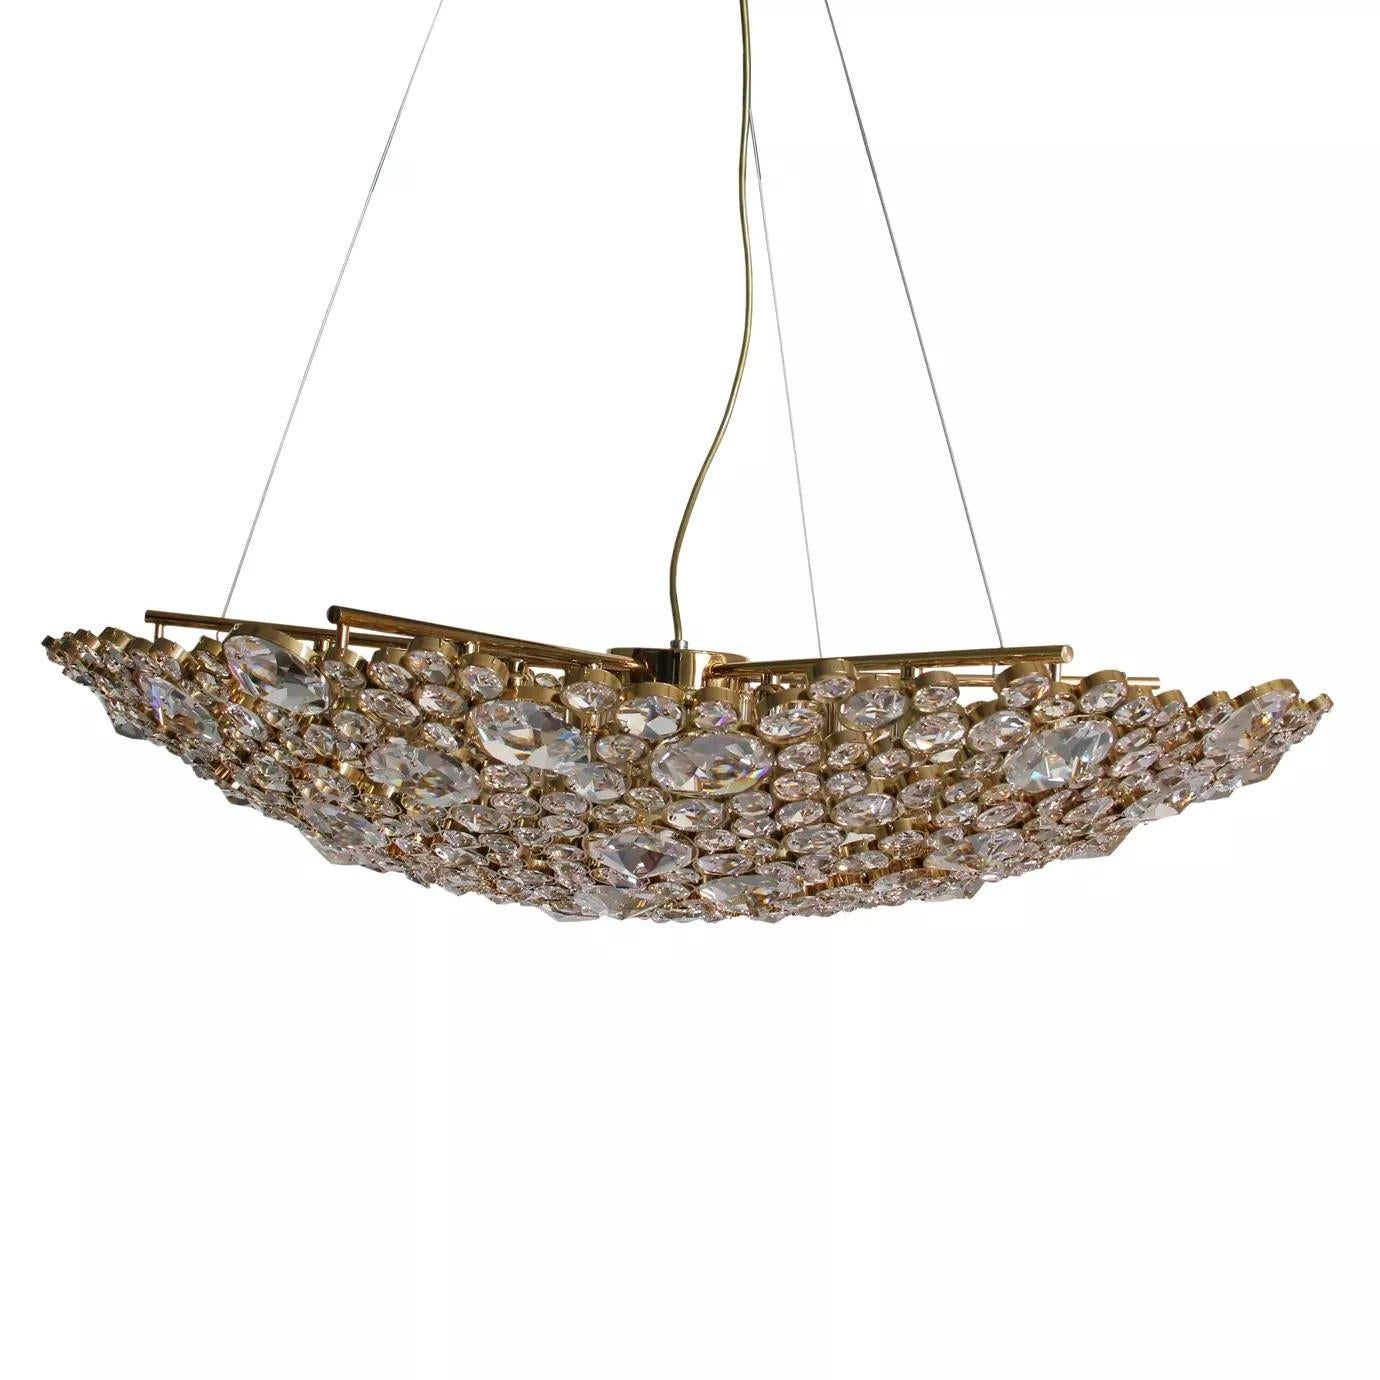 The elegant silhouette of this chandelier takes its brilliance from the skillful application of the crystal. The eternal circles are individually wrapped in brass and placed with astonishing attention to detail. The end result is an extraordinary